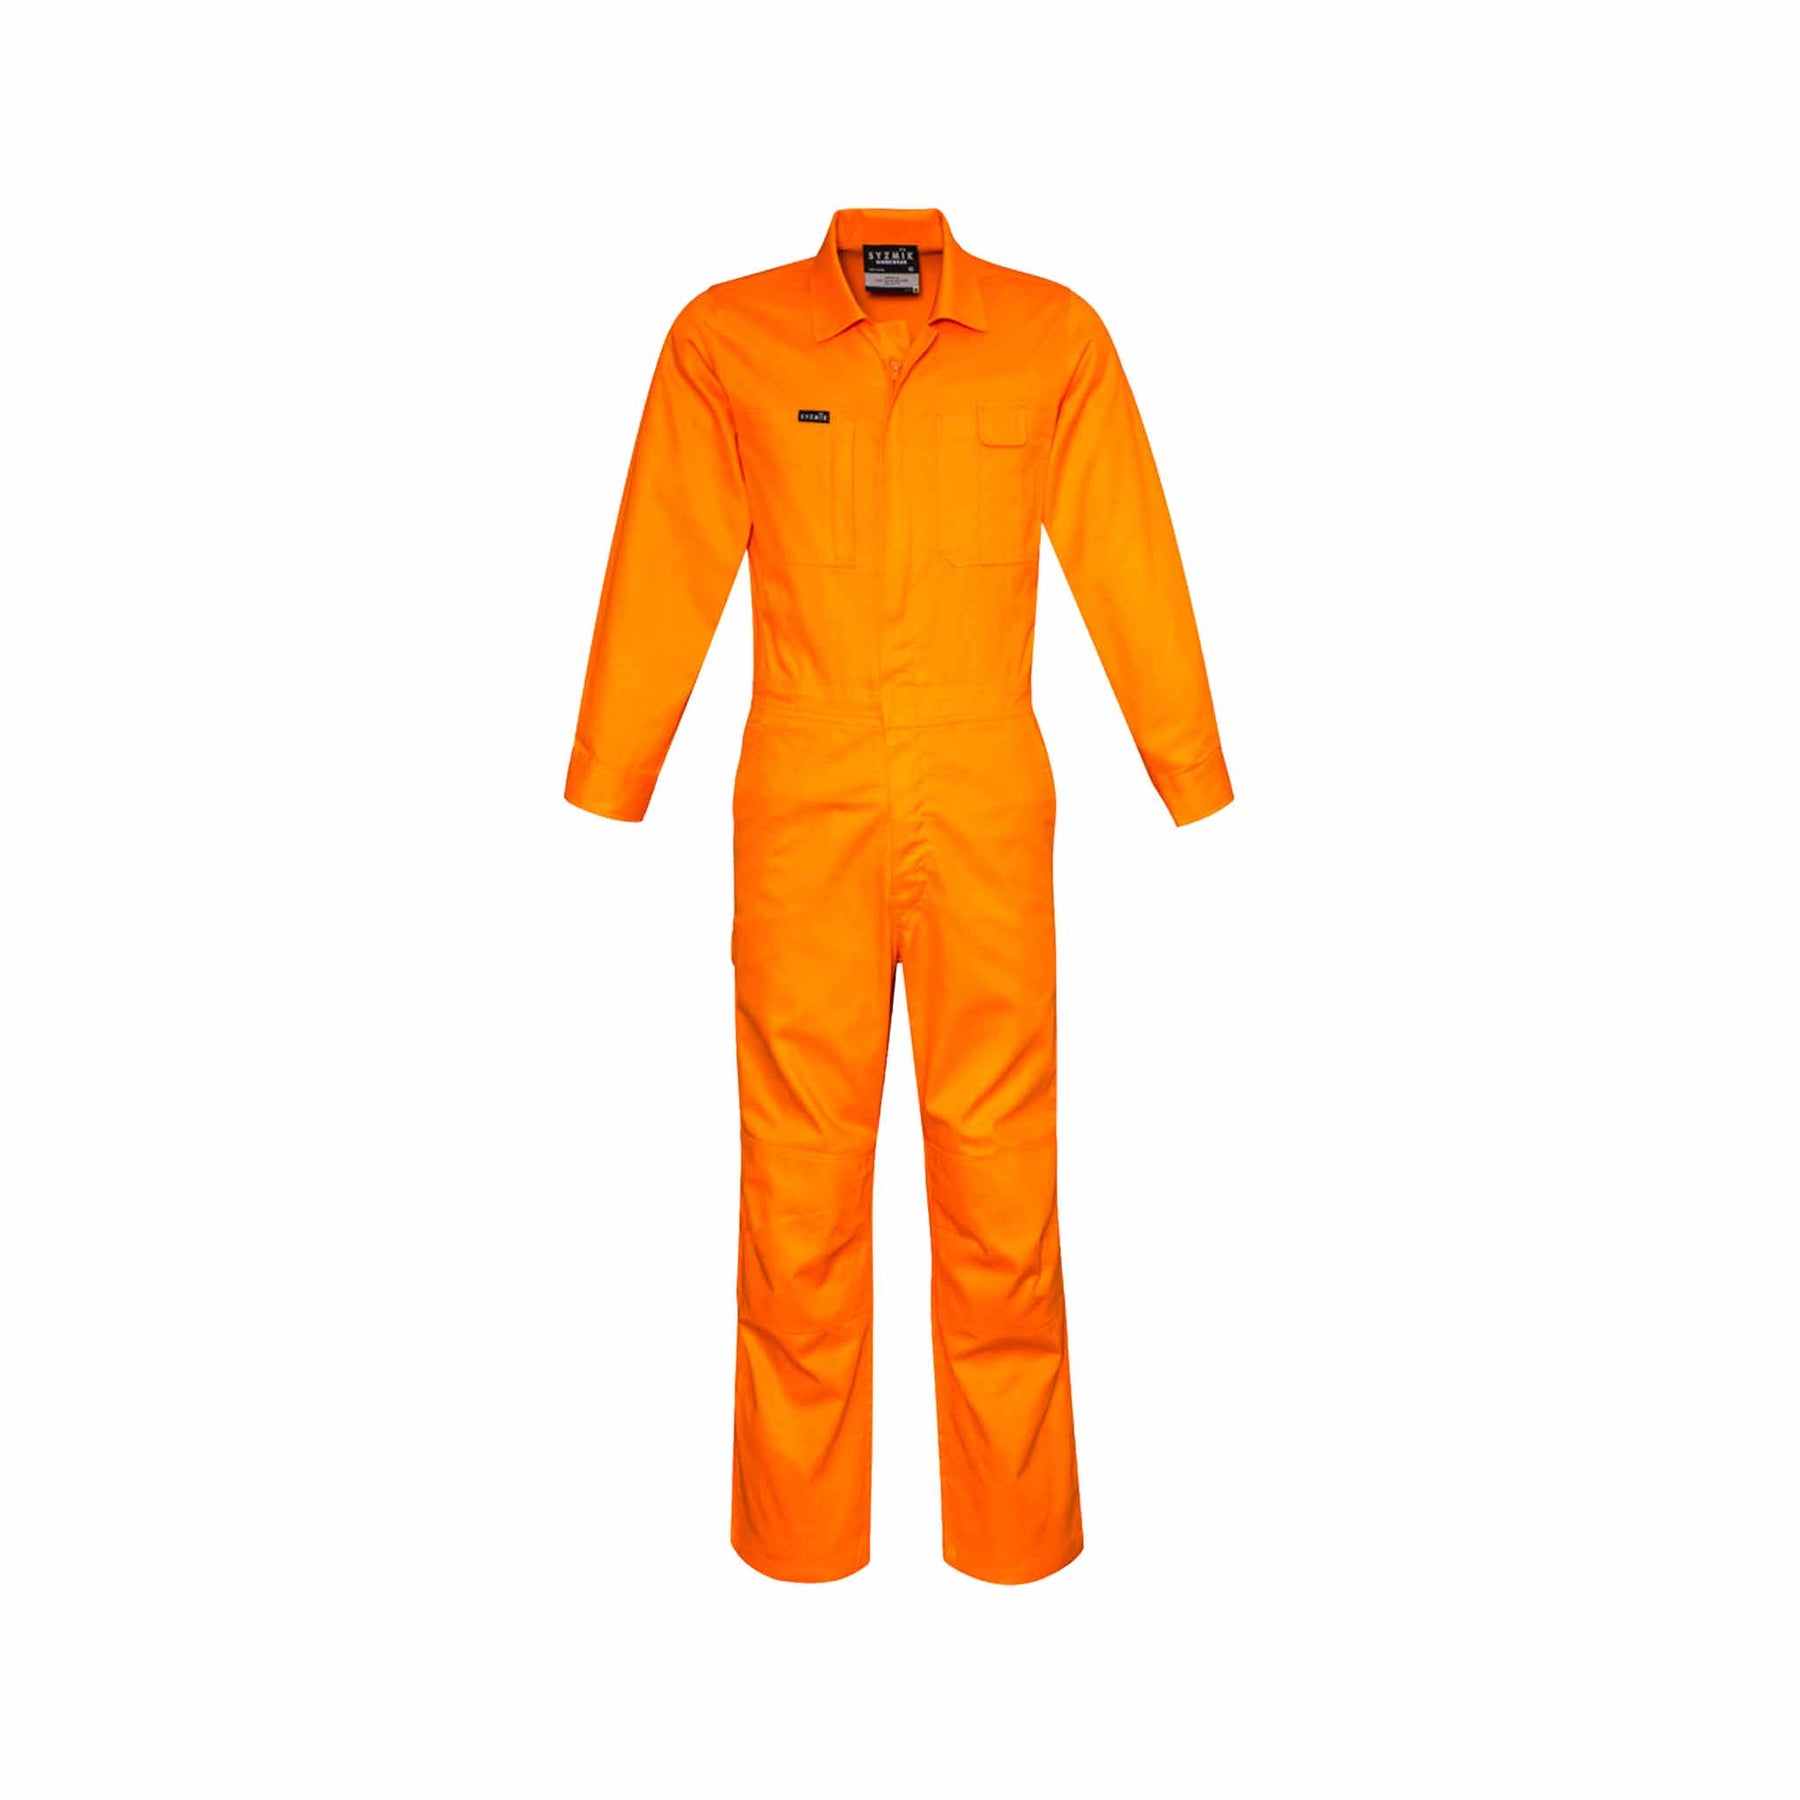 Orange lightweight long sleeved overalls front view